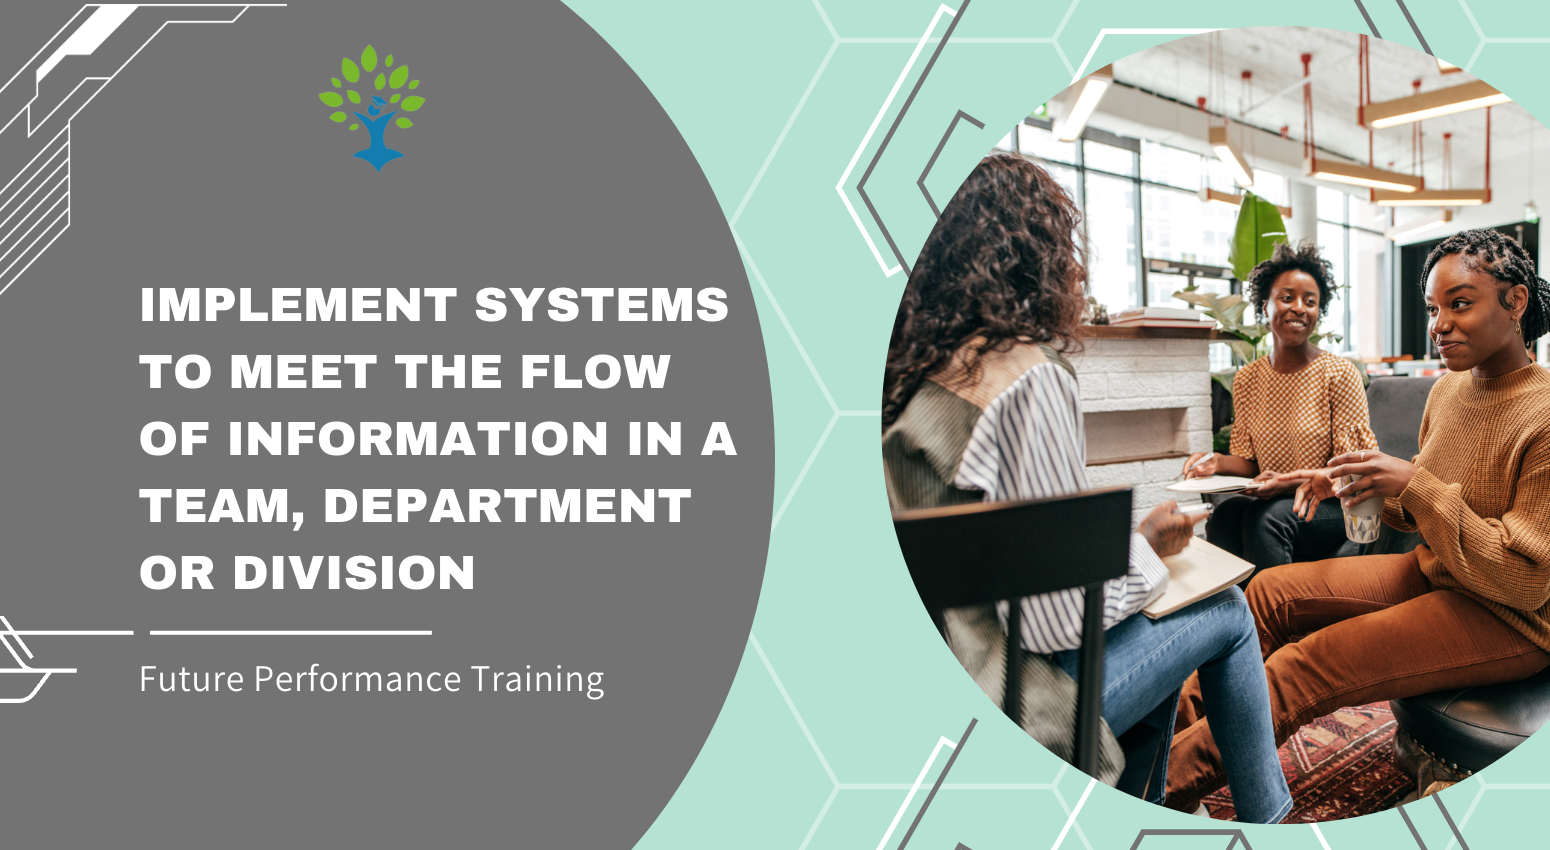 Implement Systems to Meet the Flow of Information in a Team, Department or Division